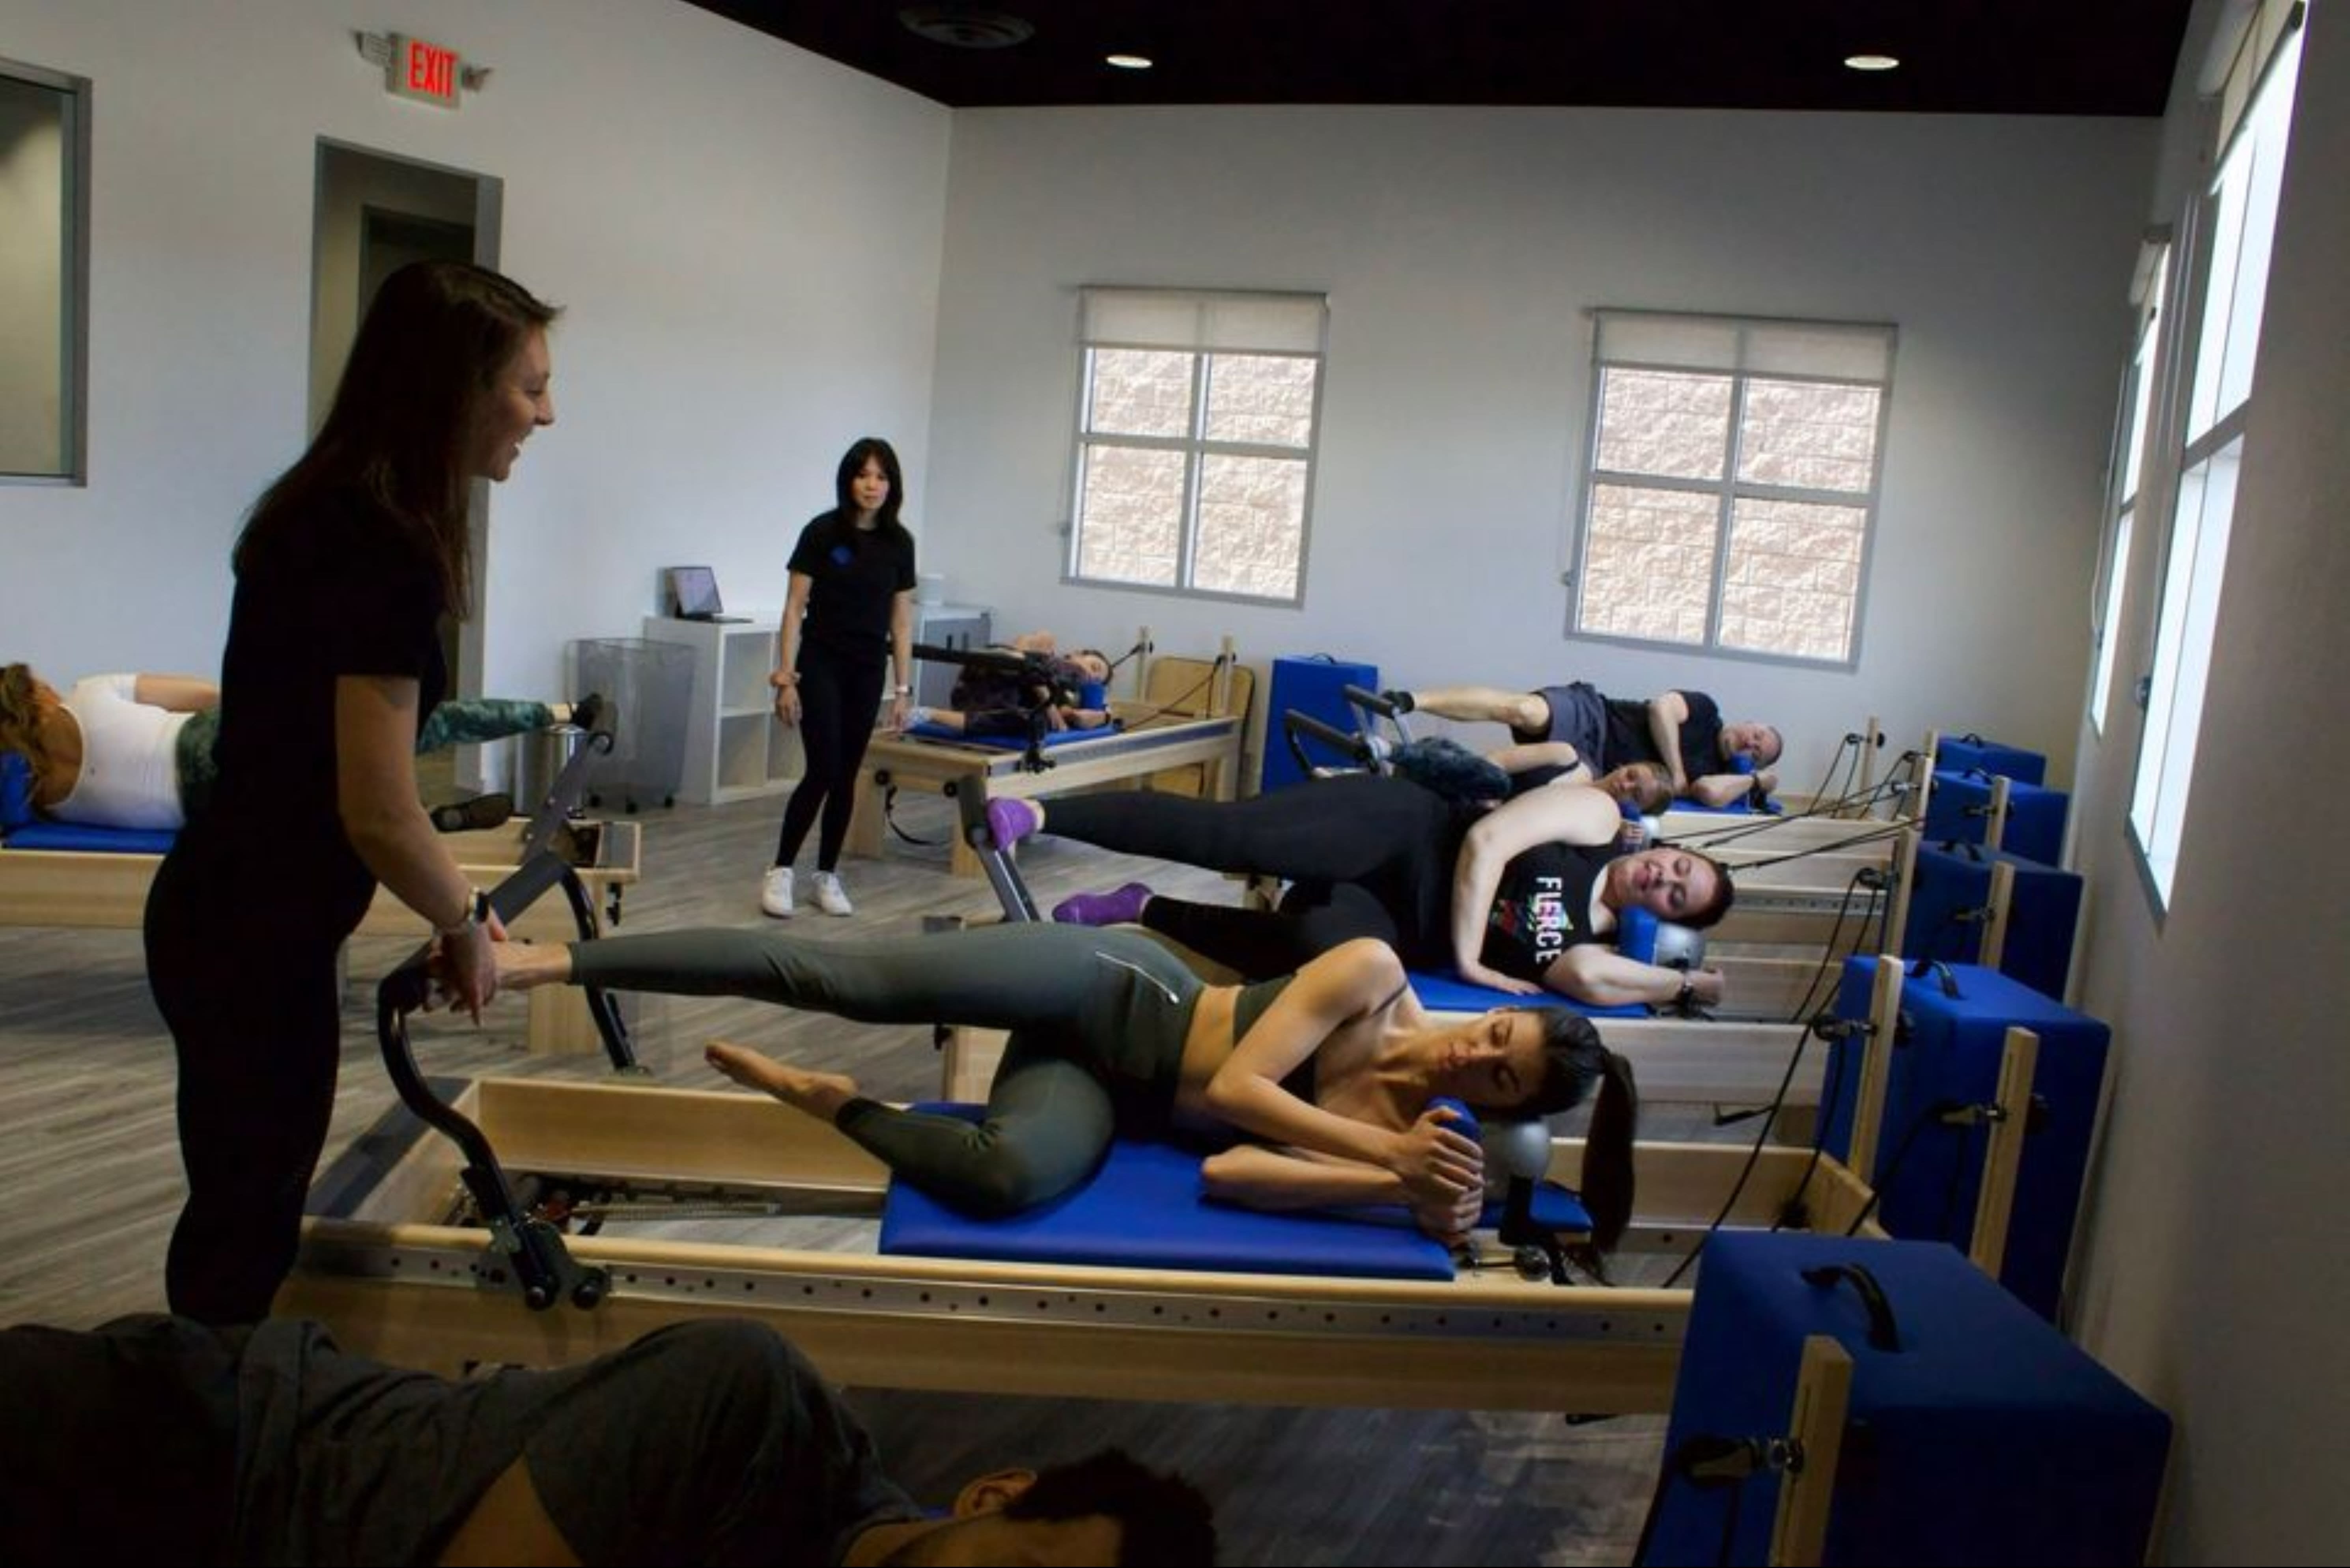 Pilates Heights: Read Reviews and Book Classes on ClassPass